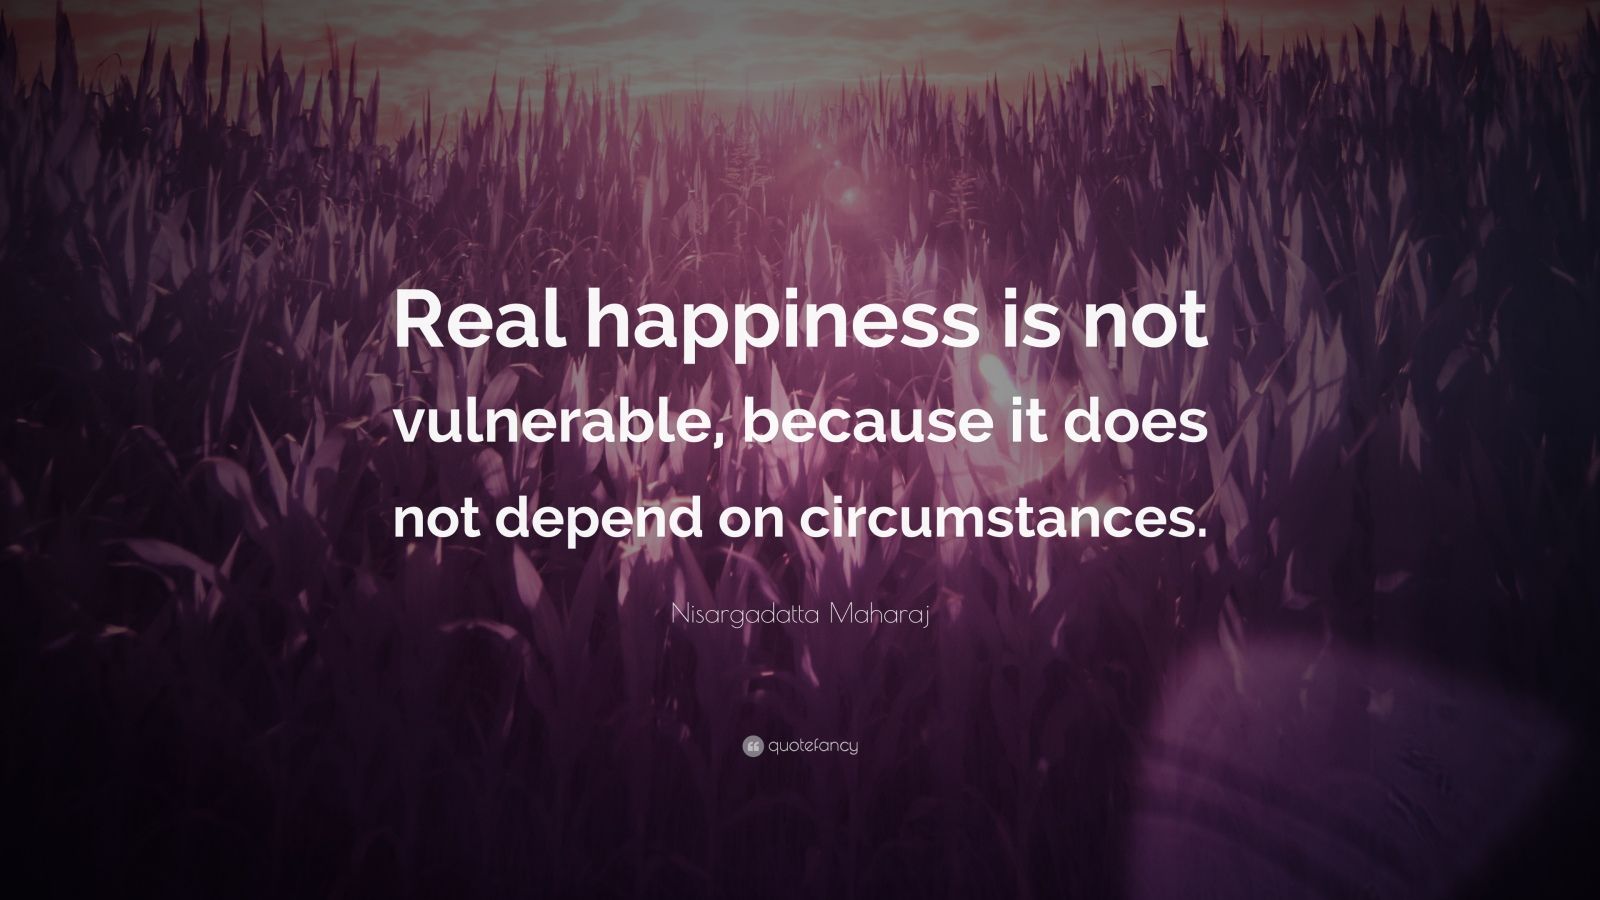 "real happiness is not vulnerable, because it does not depend on